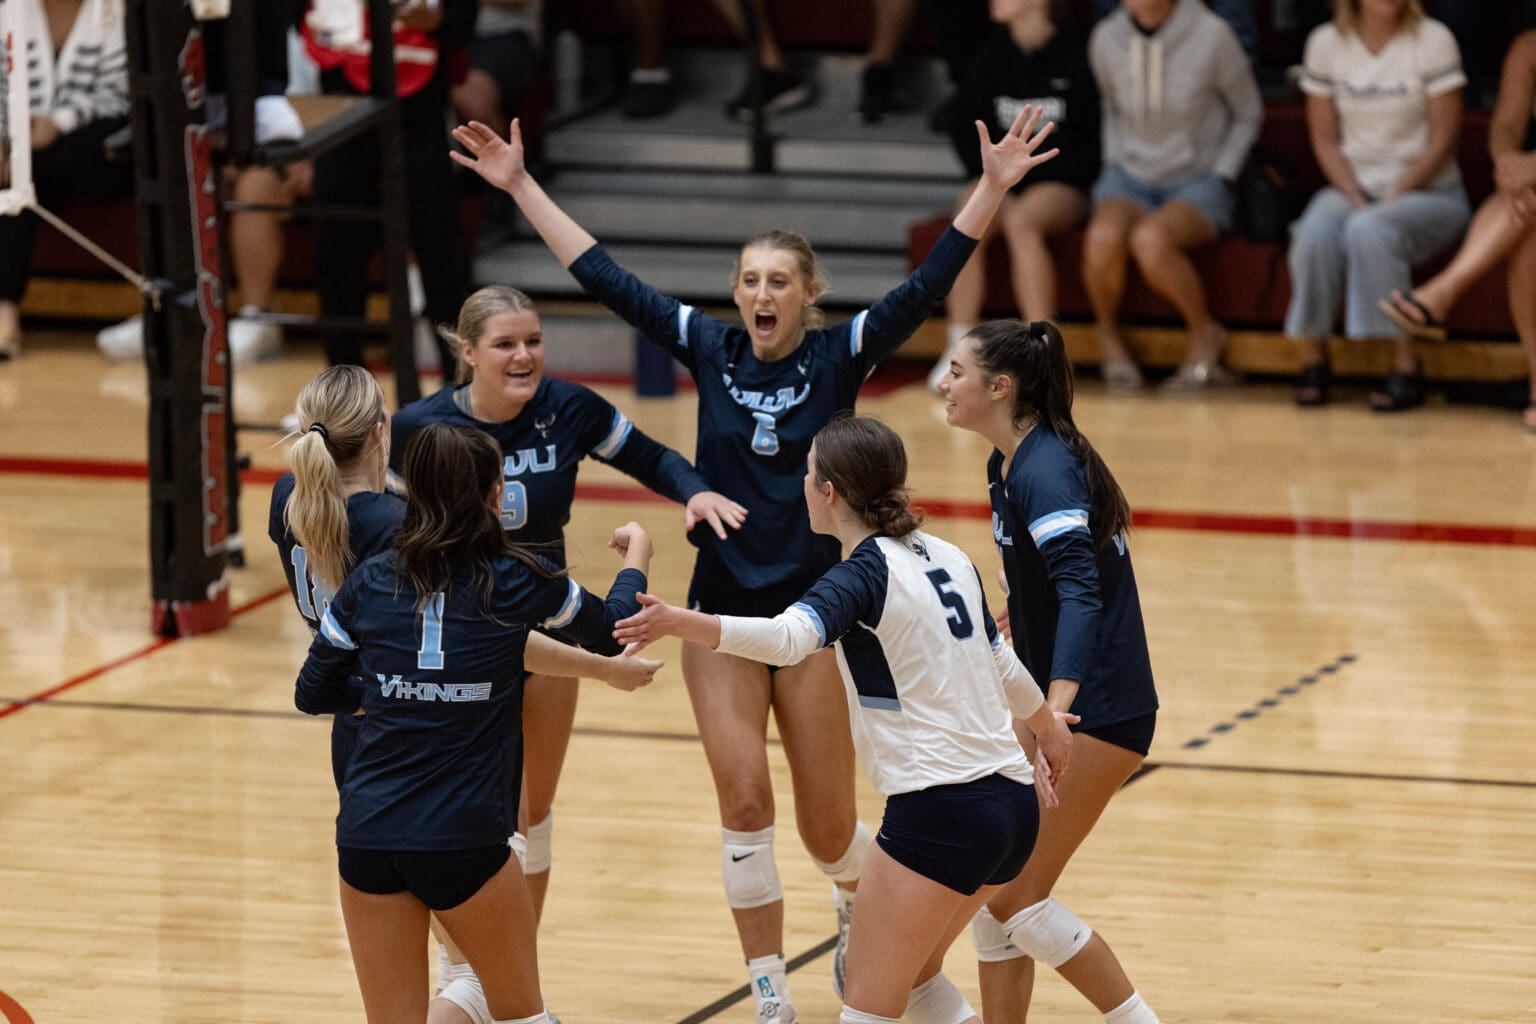 Western Washington volleyball celebrates Sept. 14 after scoring during a match at Central Washington University. The Vikings will host the Wildcats for their regular-season finale on Saturday